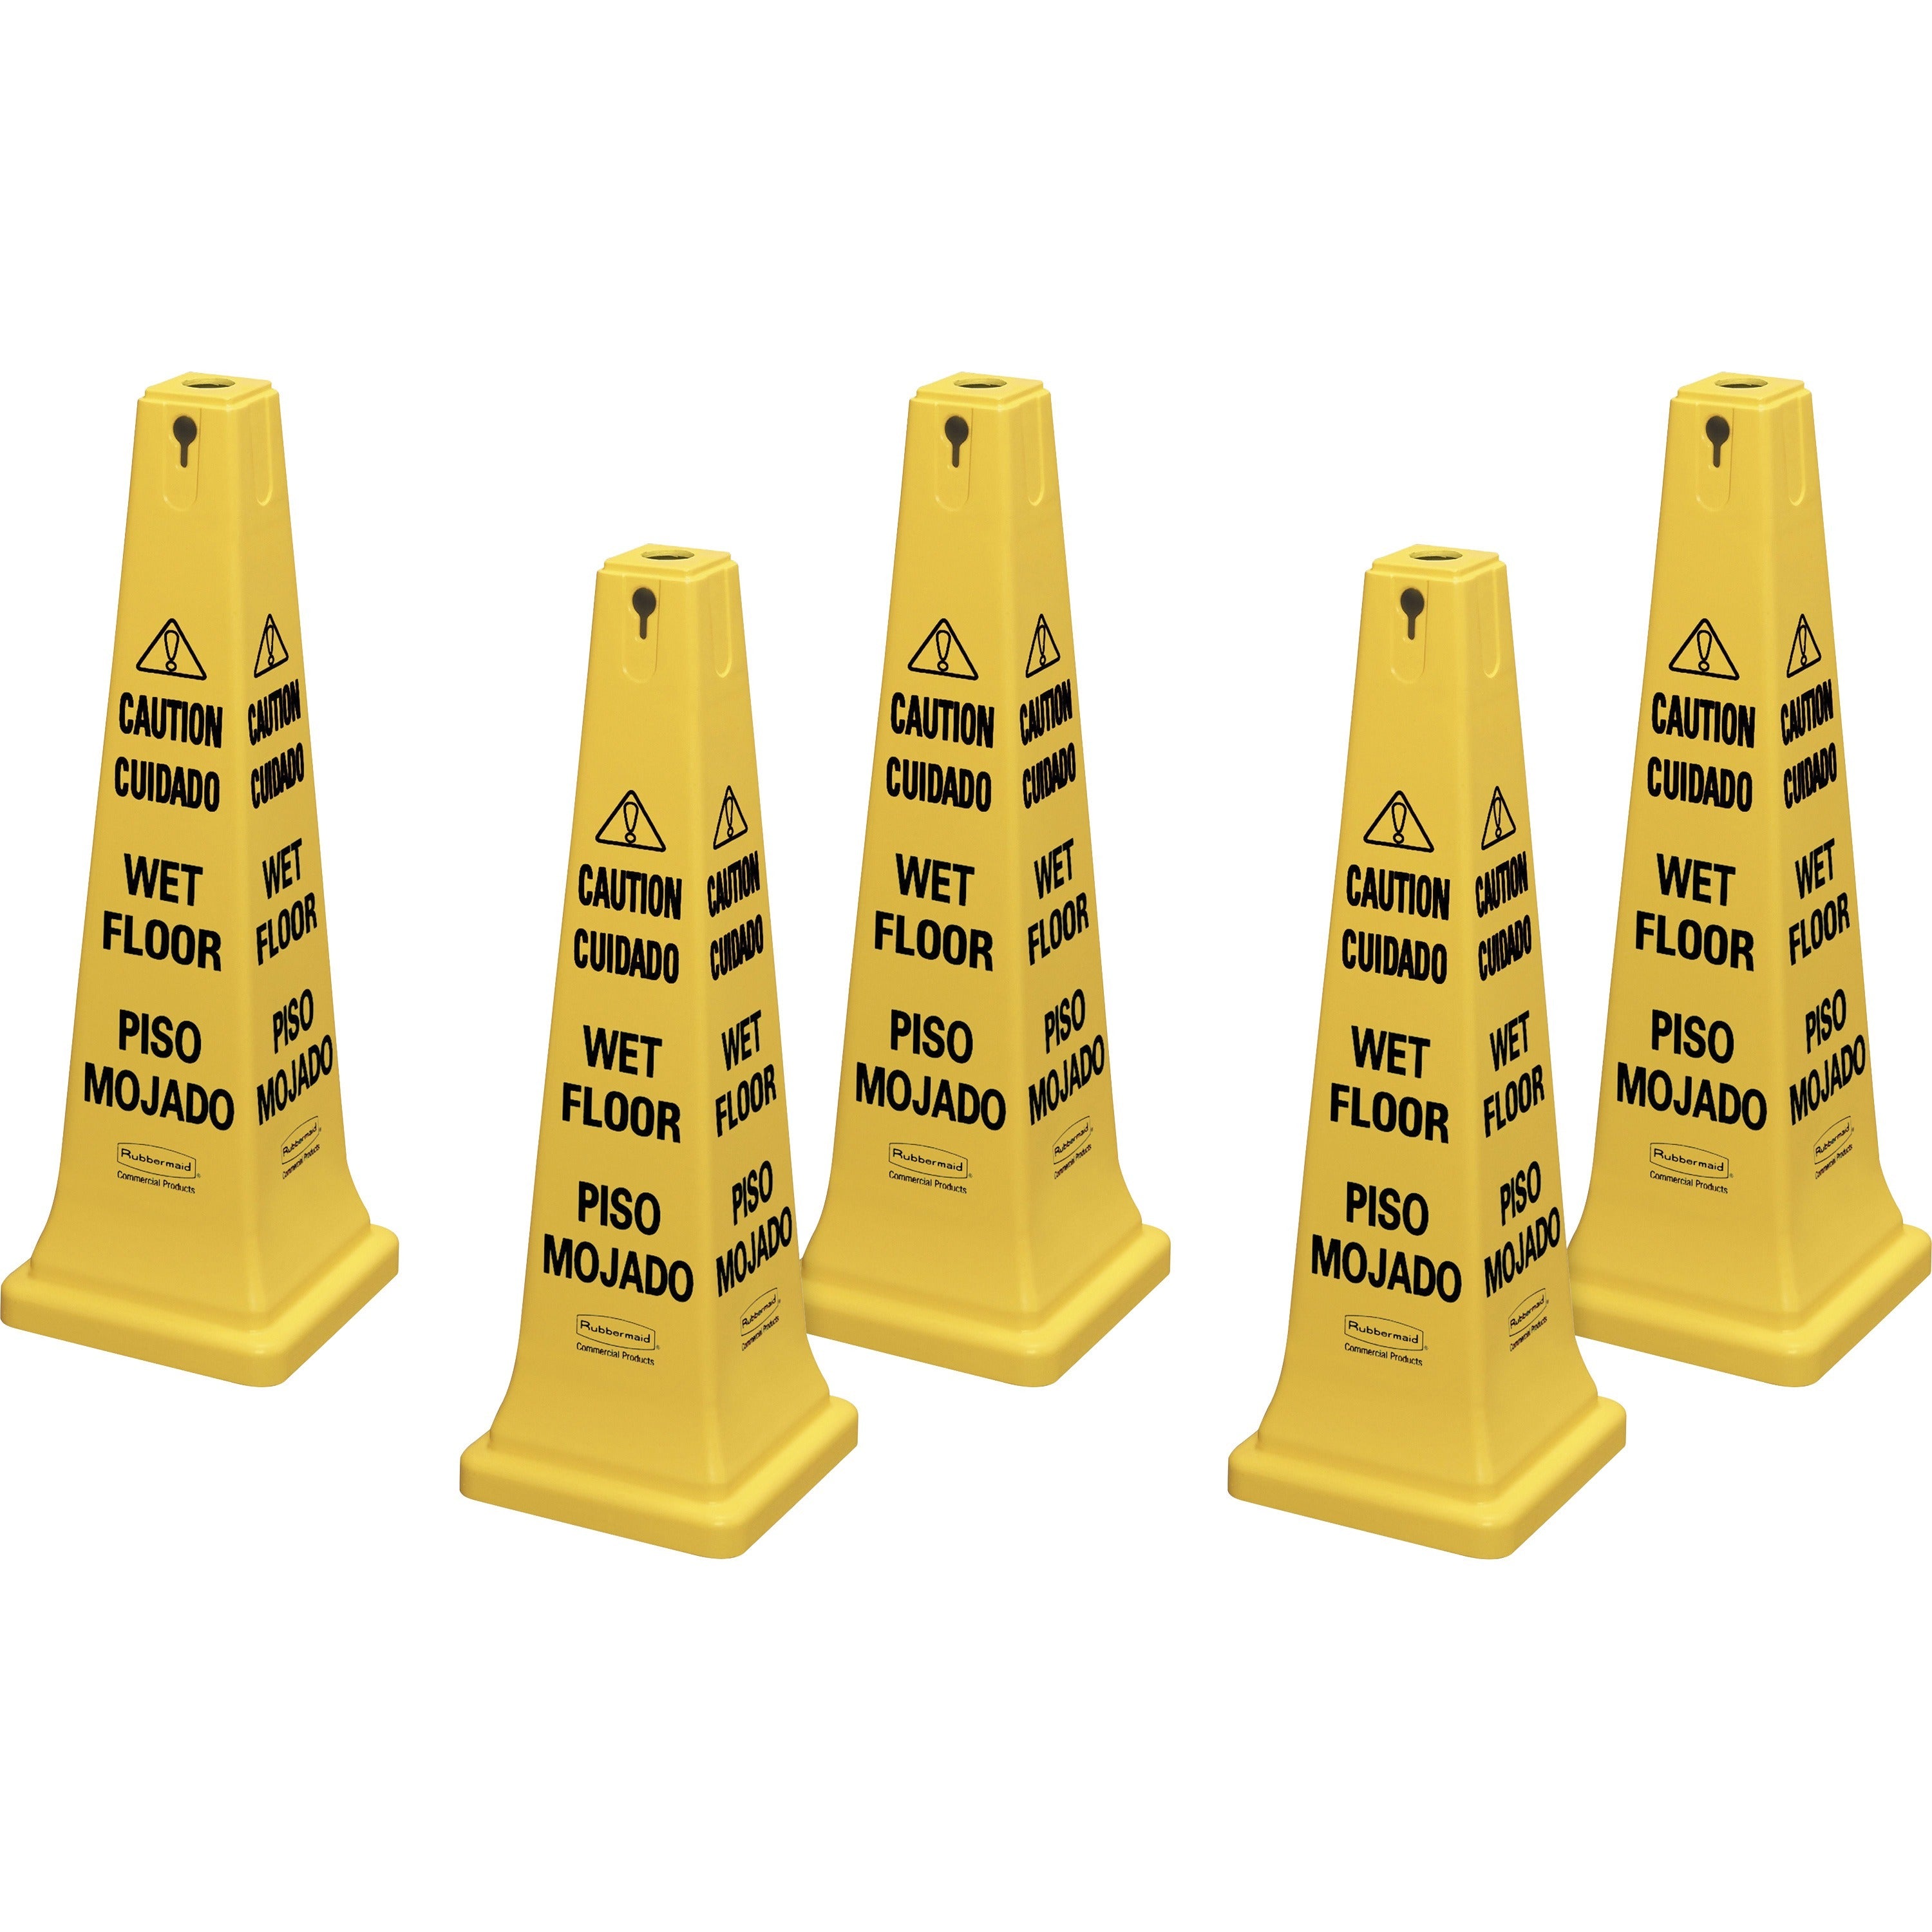 rubbermaid-commercial-36-safety-cone-5-carton-spanish-english-caution-wet-floor-print-message-122-width-x-36-height-x-122-depth-cone-shape-stackable-sturdy-plastic-bright-yellow_rcp627677ct - 1